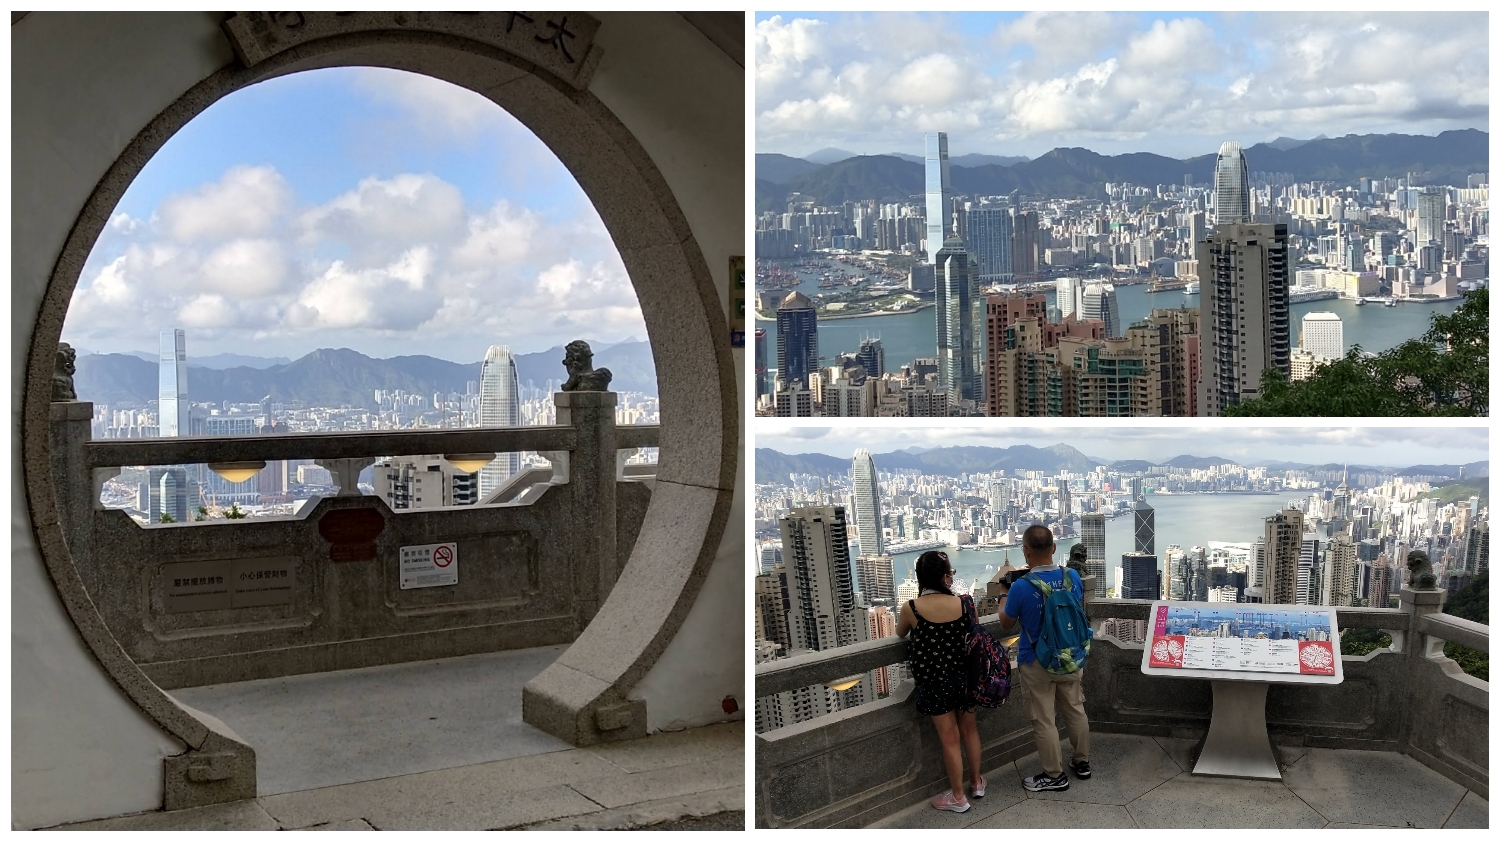 Frank reminds travelers: four mistakes at Hong Kong Victoria Peak